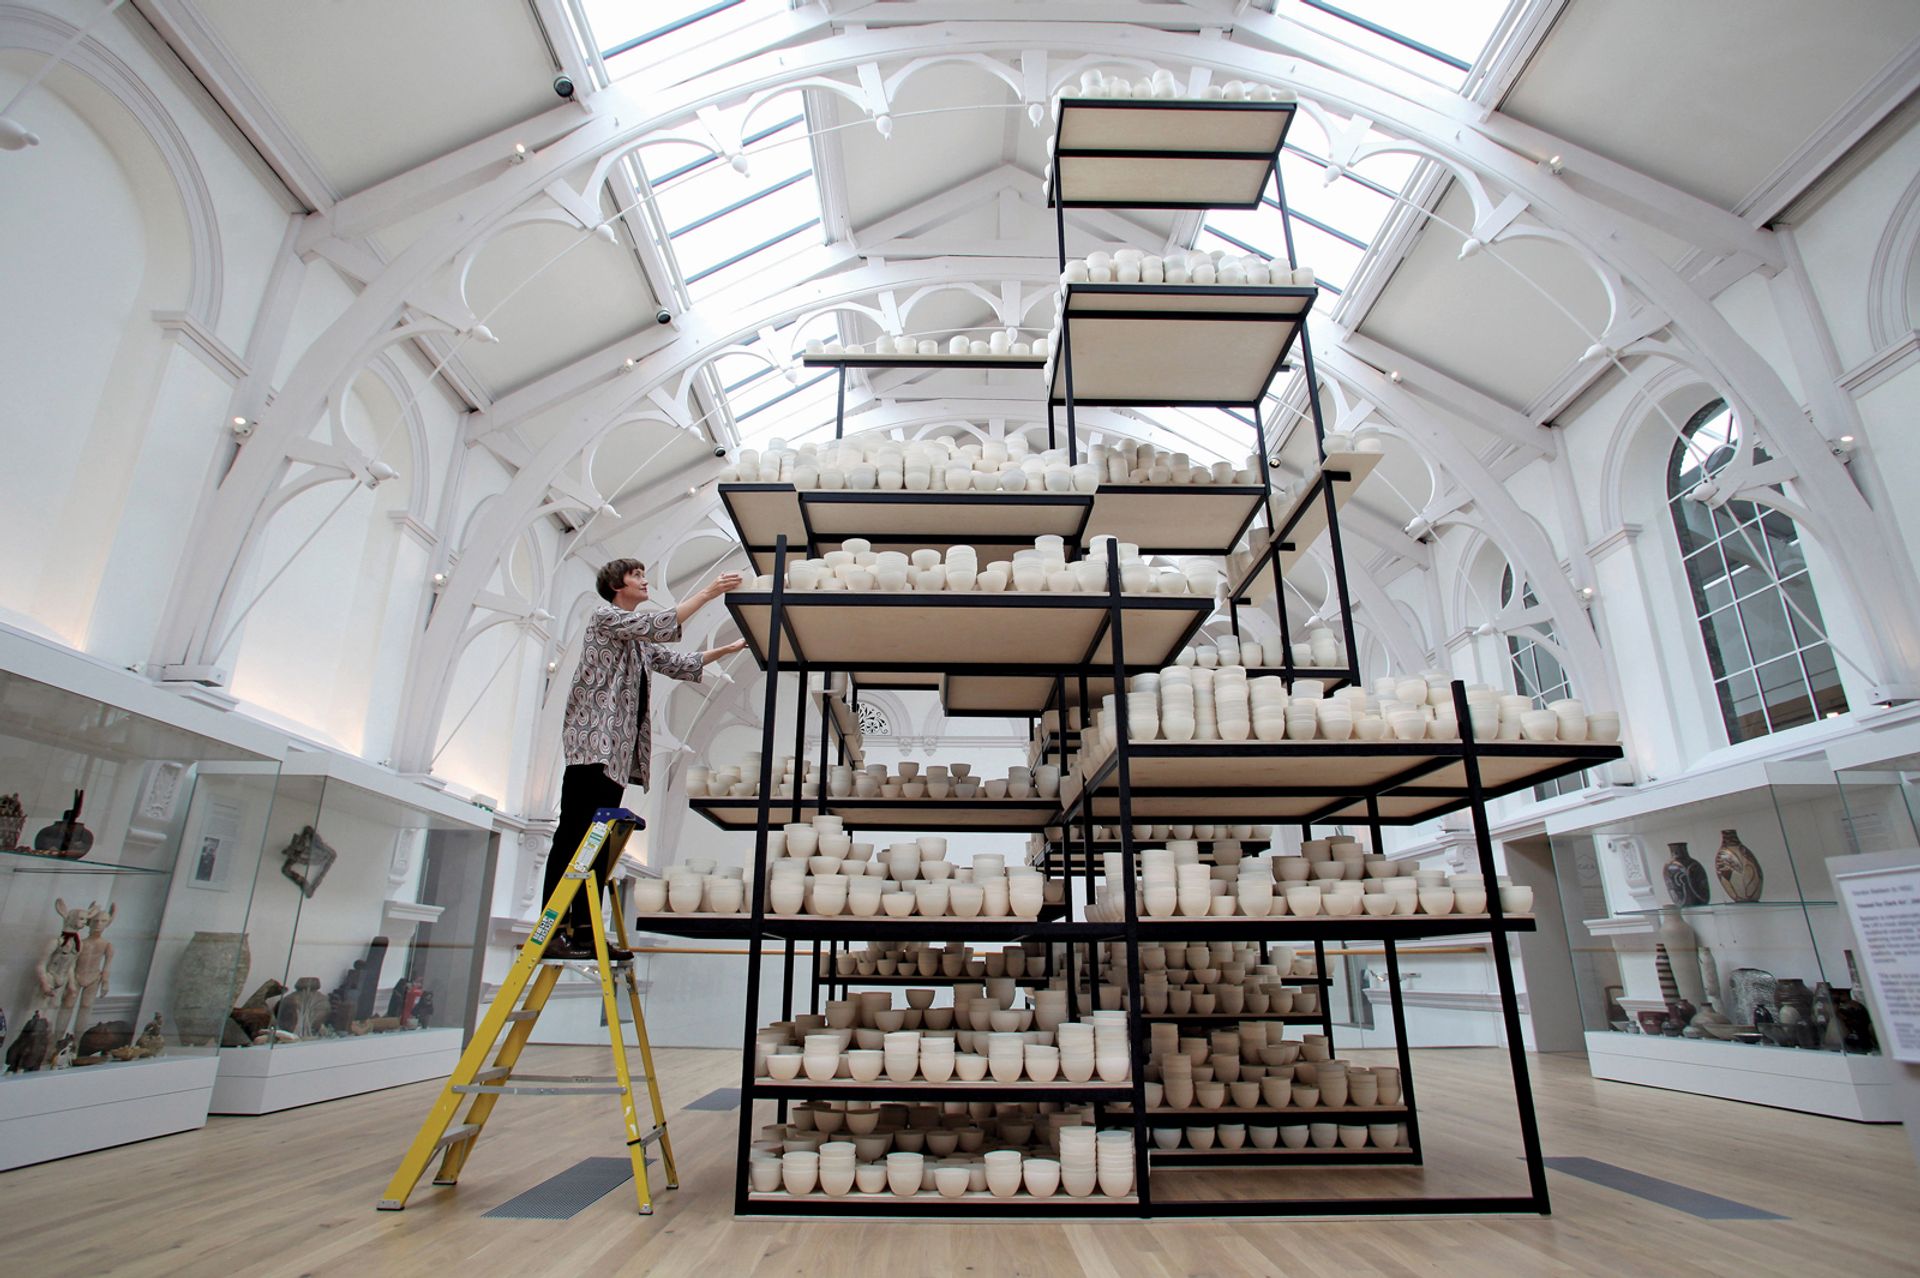 Clare Twomey’s 10,000 Hours (2015) was among the works shown at York Art Gallery after its “dramatic renovation”, which saw it shortlisted for Museum of the Year in 2016 Kippa Matthews